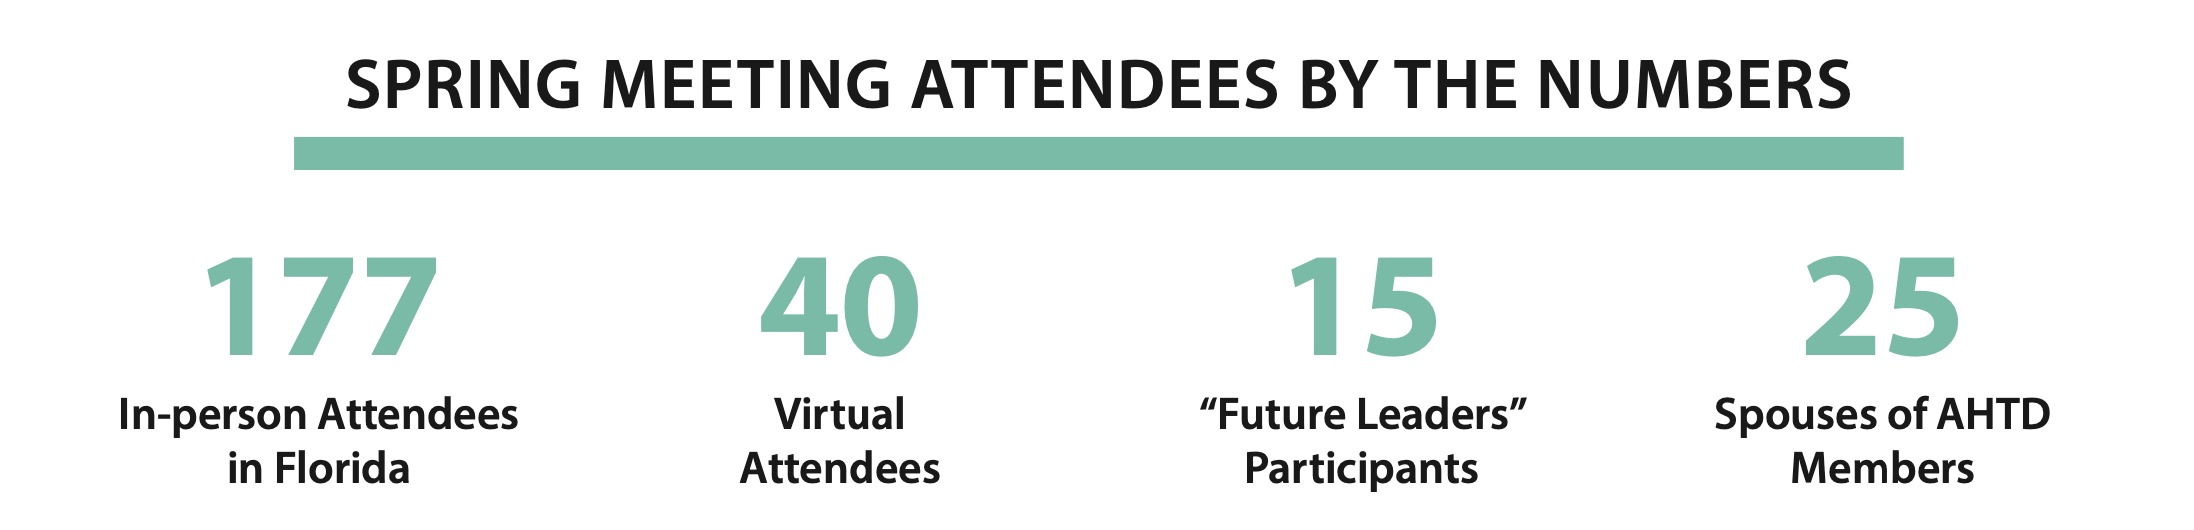 Spring Meeting Attendees by the Numbers - 177 In-person attendees, 40 virtual attendees, 15 "future leader" participants, 25 spouses